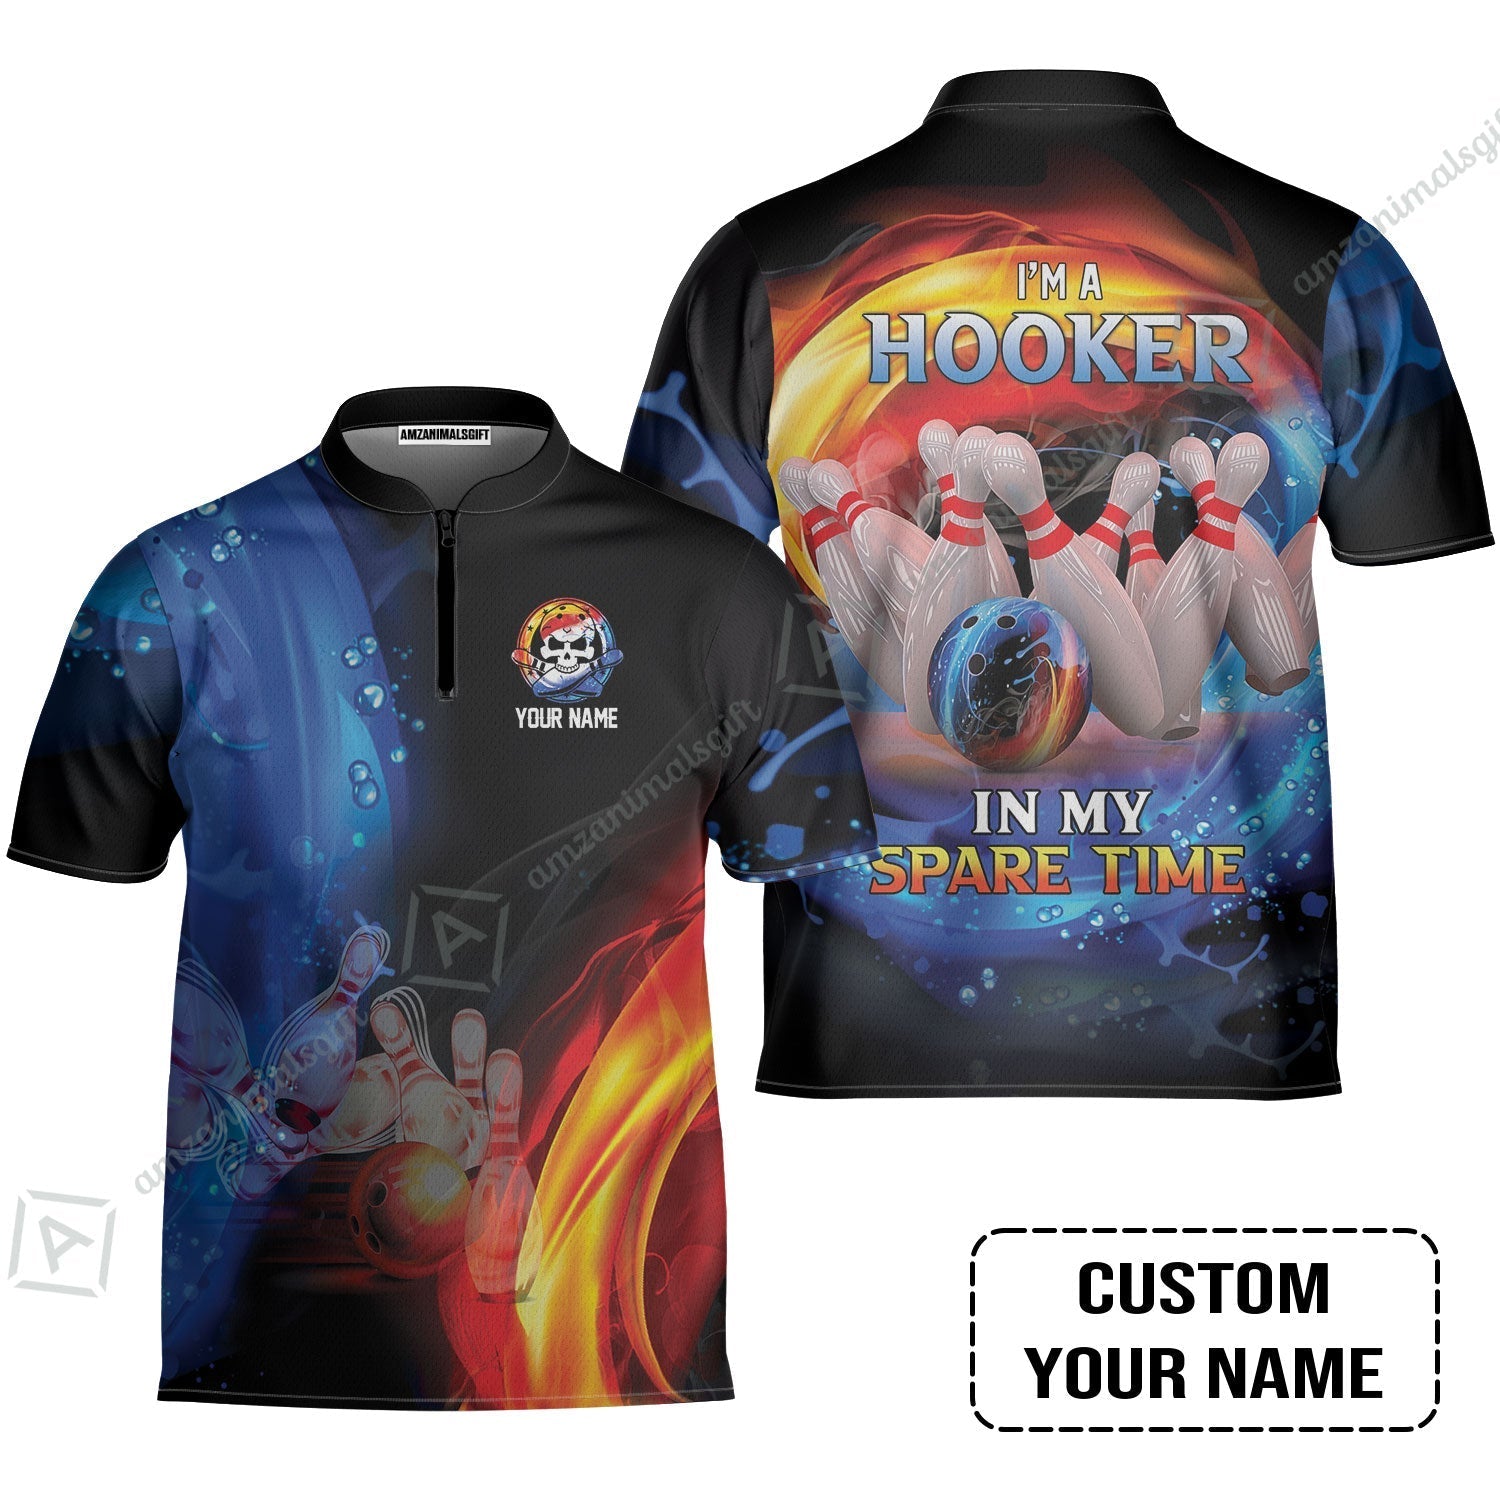 Customized Name Bowling Bowling Jersey - Bowling I'm A Hooker In My Spare Time Personalized Bowling Jersey